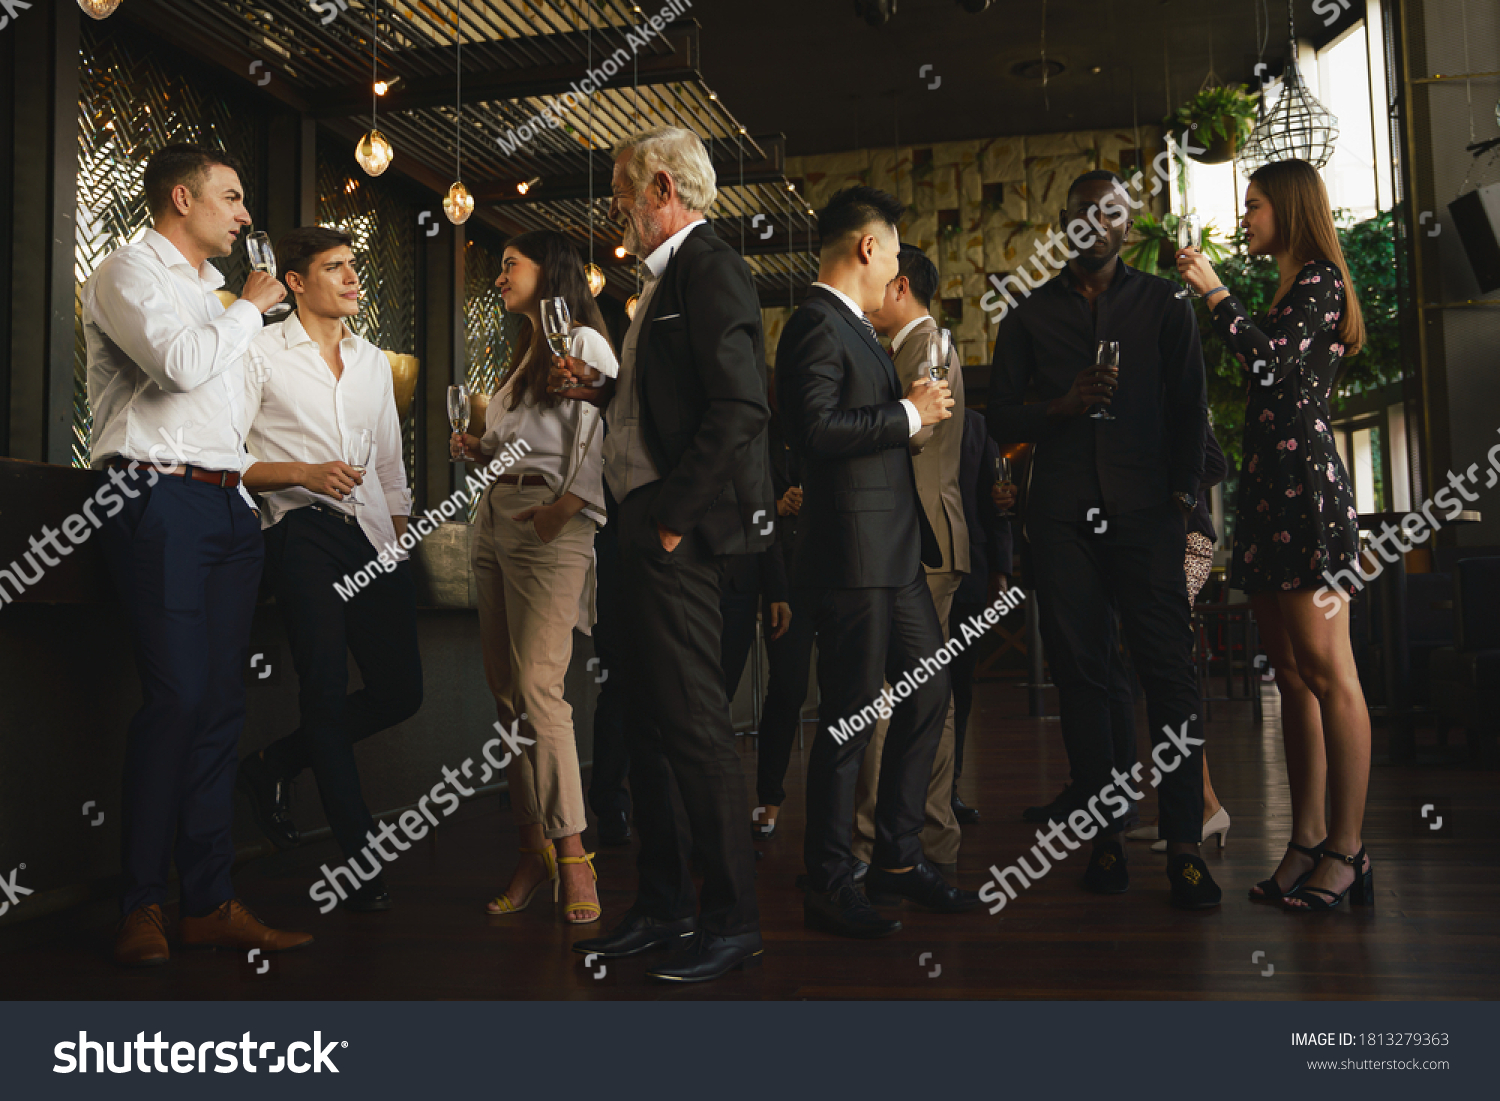 corporate businesspeople having fun and talking together in corporate party in club to celebrate spacial event such as corporate aniversary #1813279363